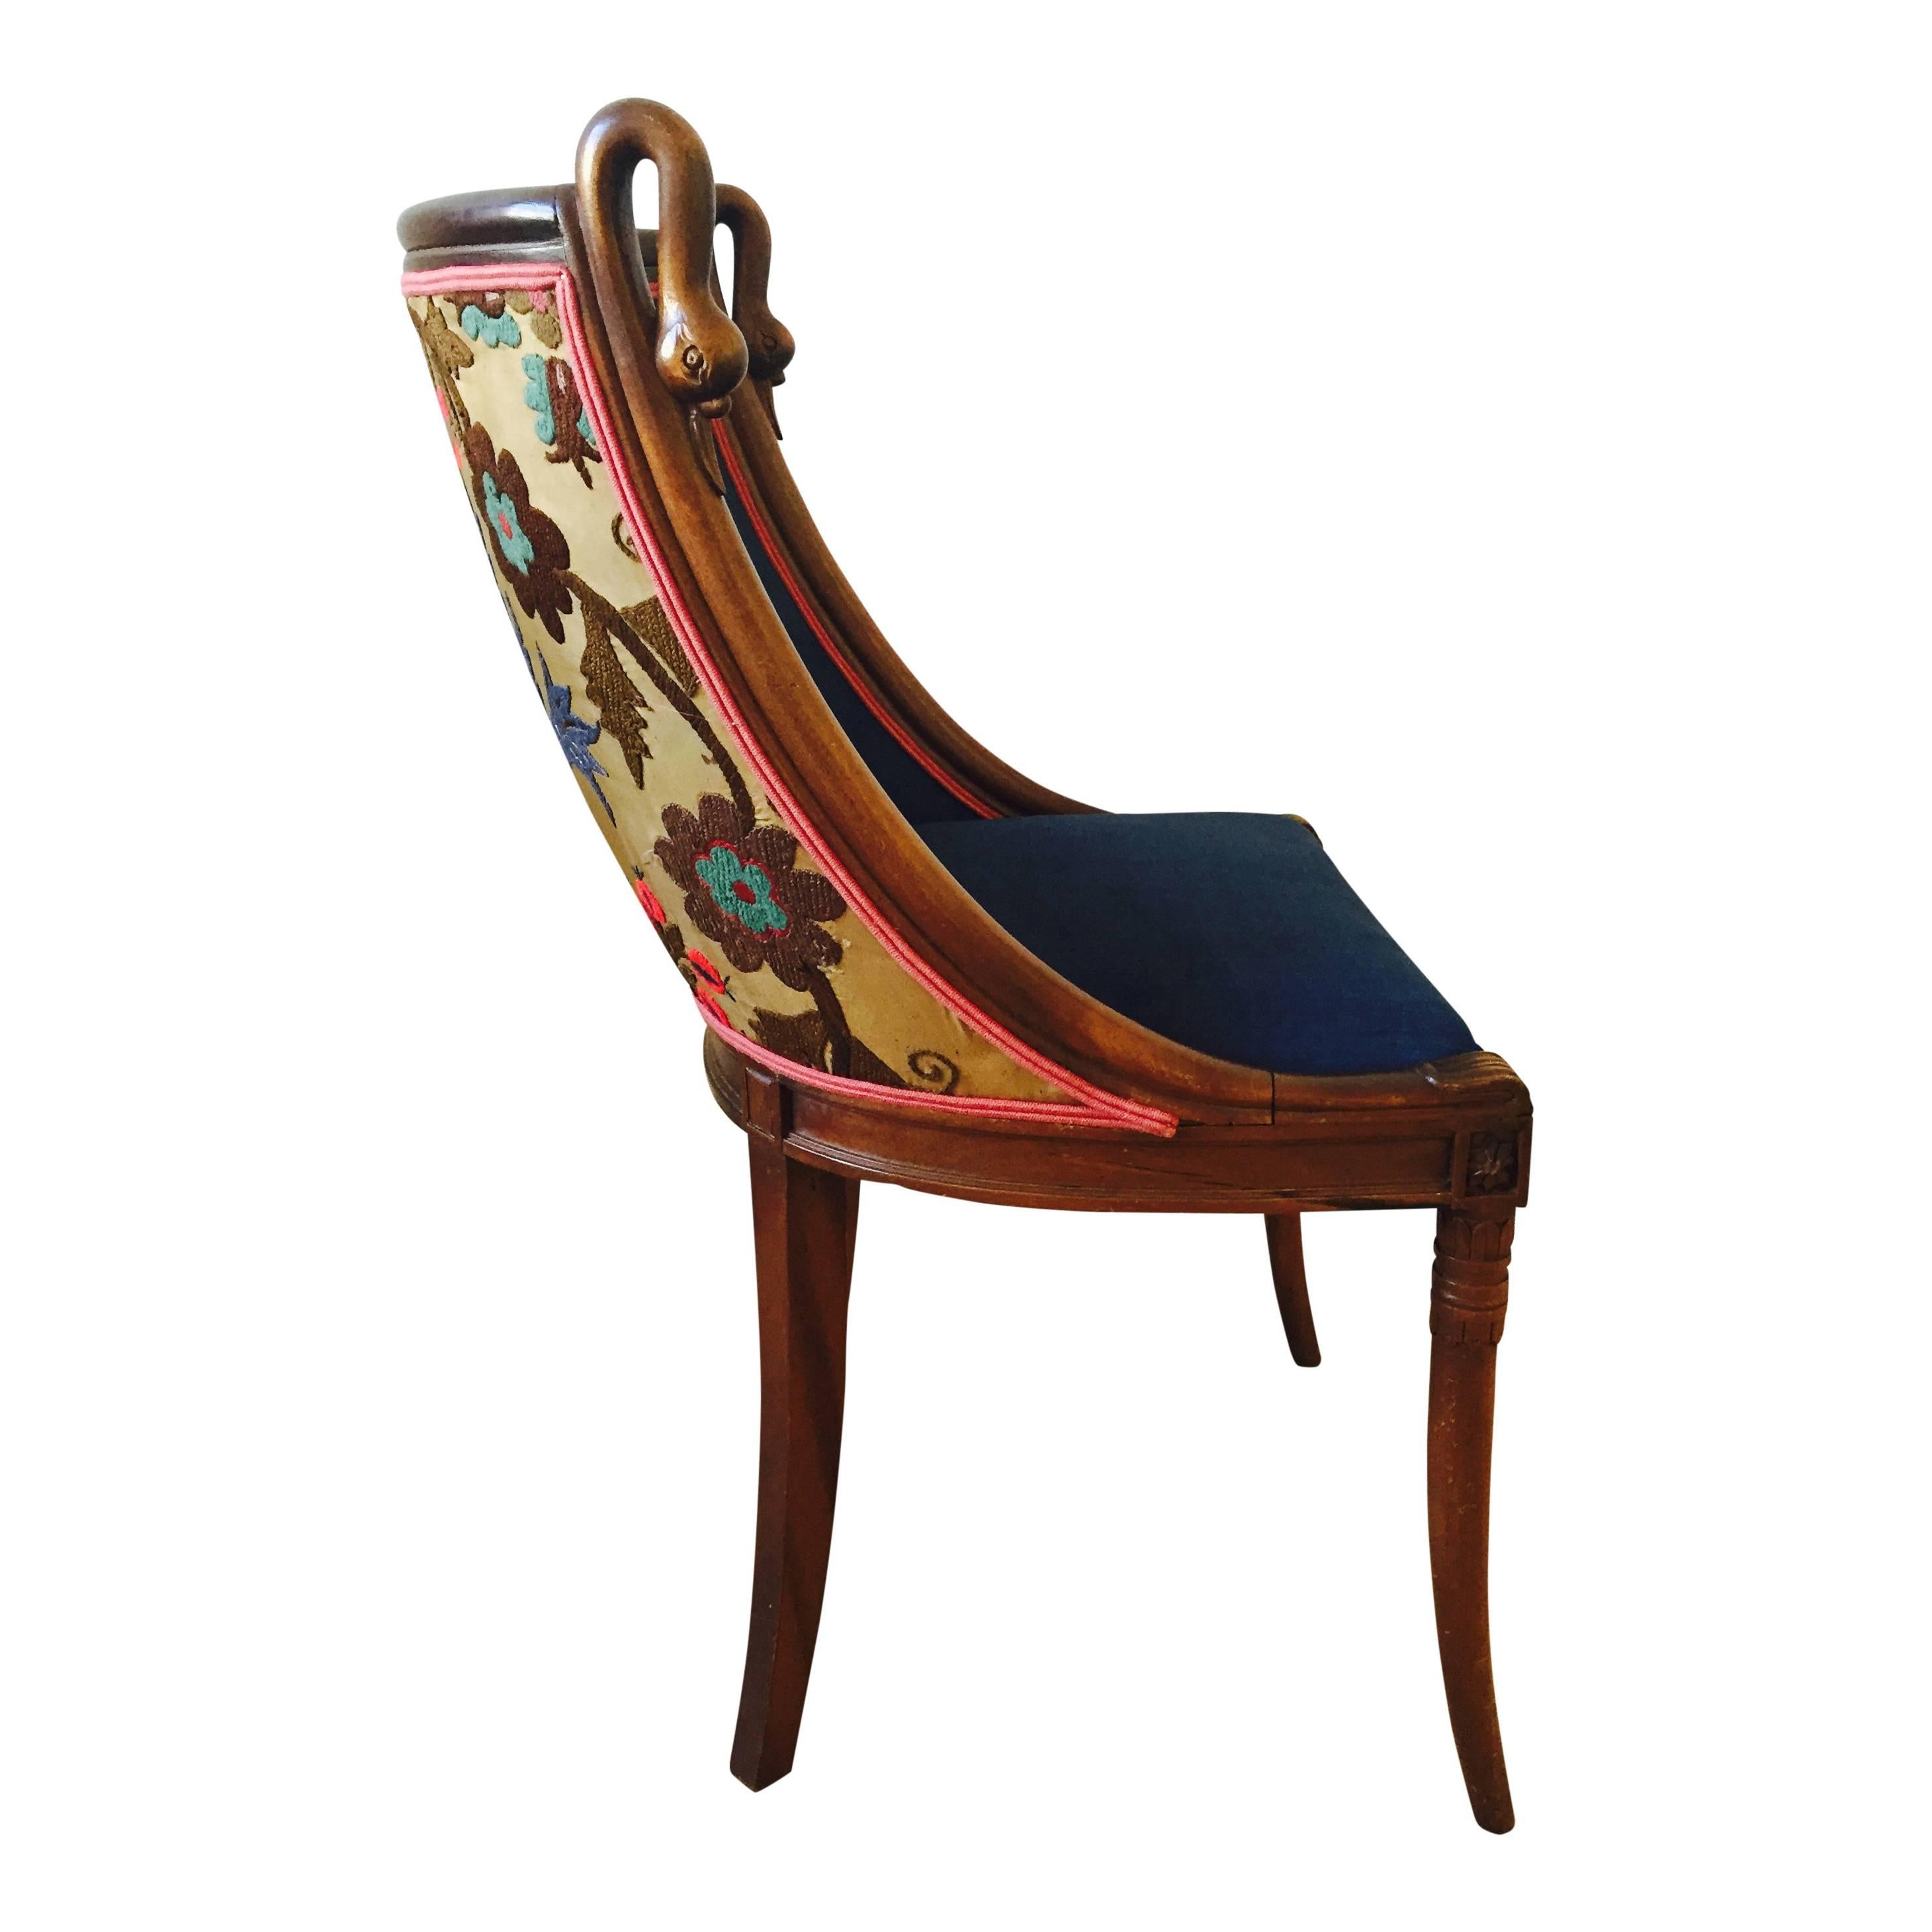 Small Chair with Curved Swan Necks, 20th Century Empire Style For Sale